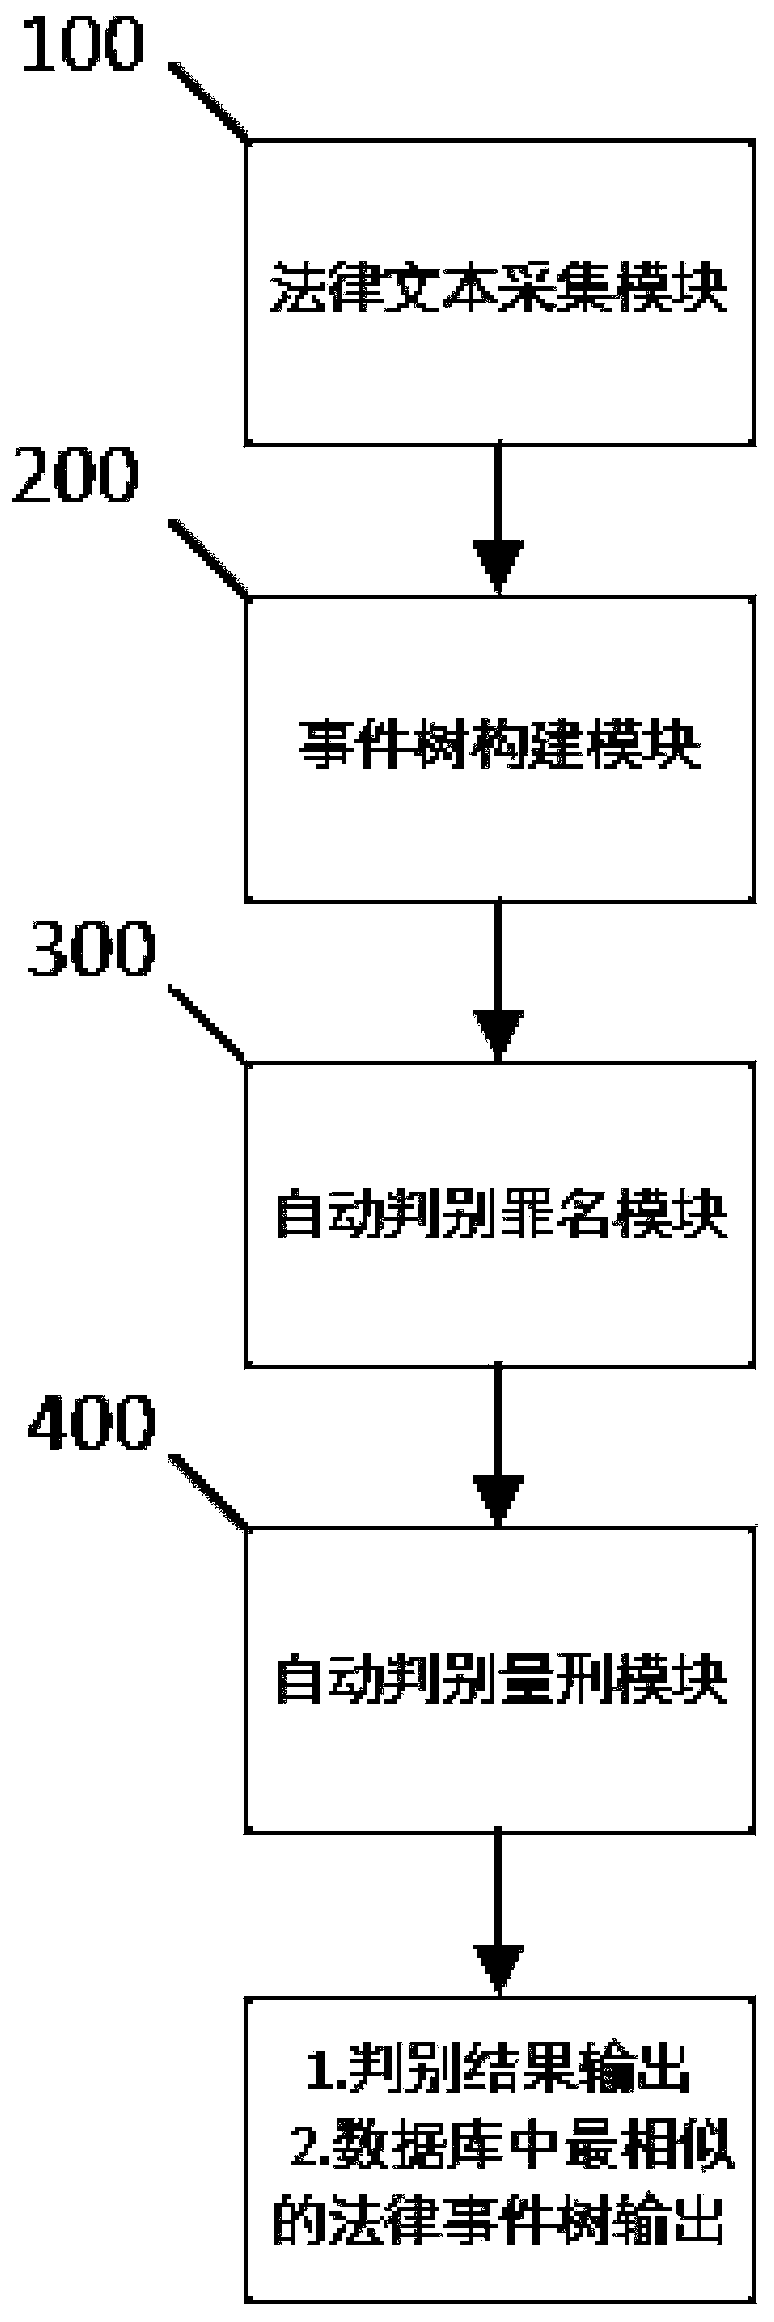 A judicial case discrimination system and method based on event tree analysis